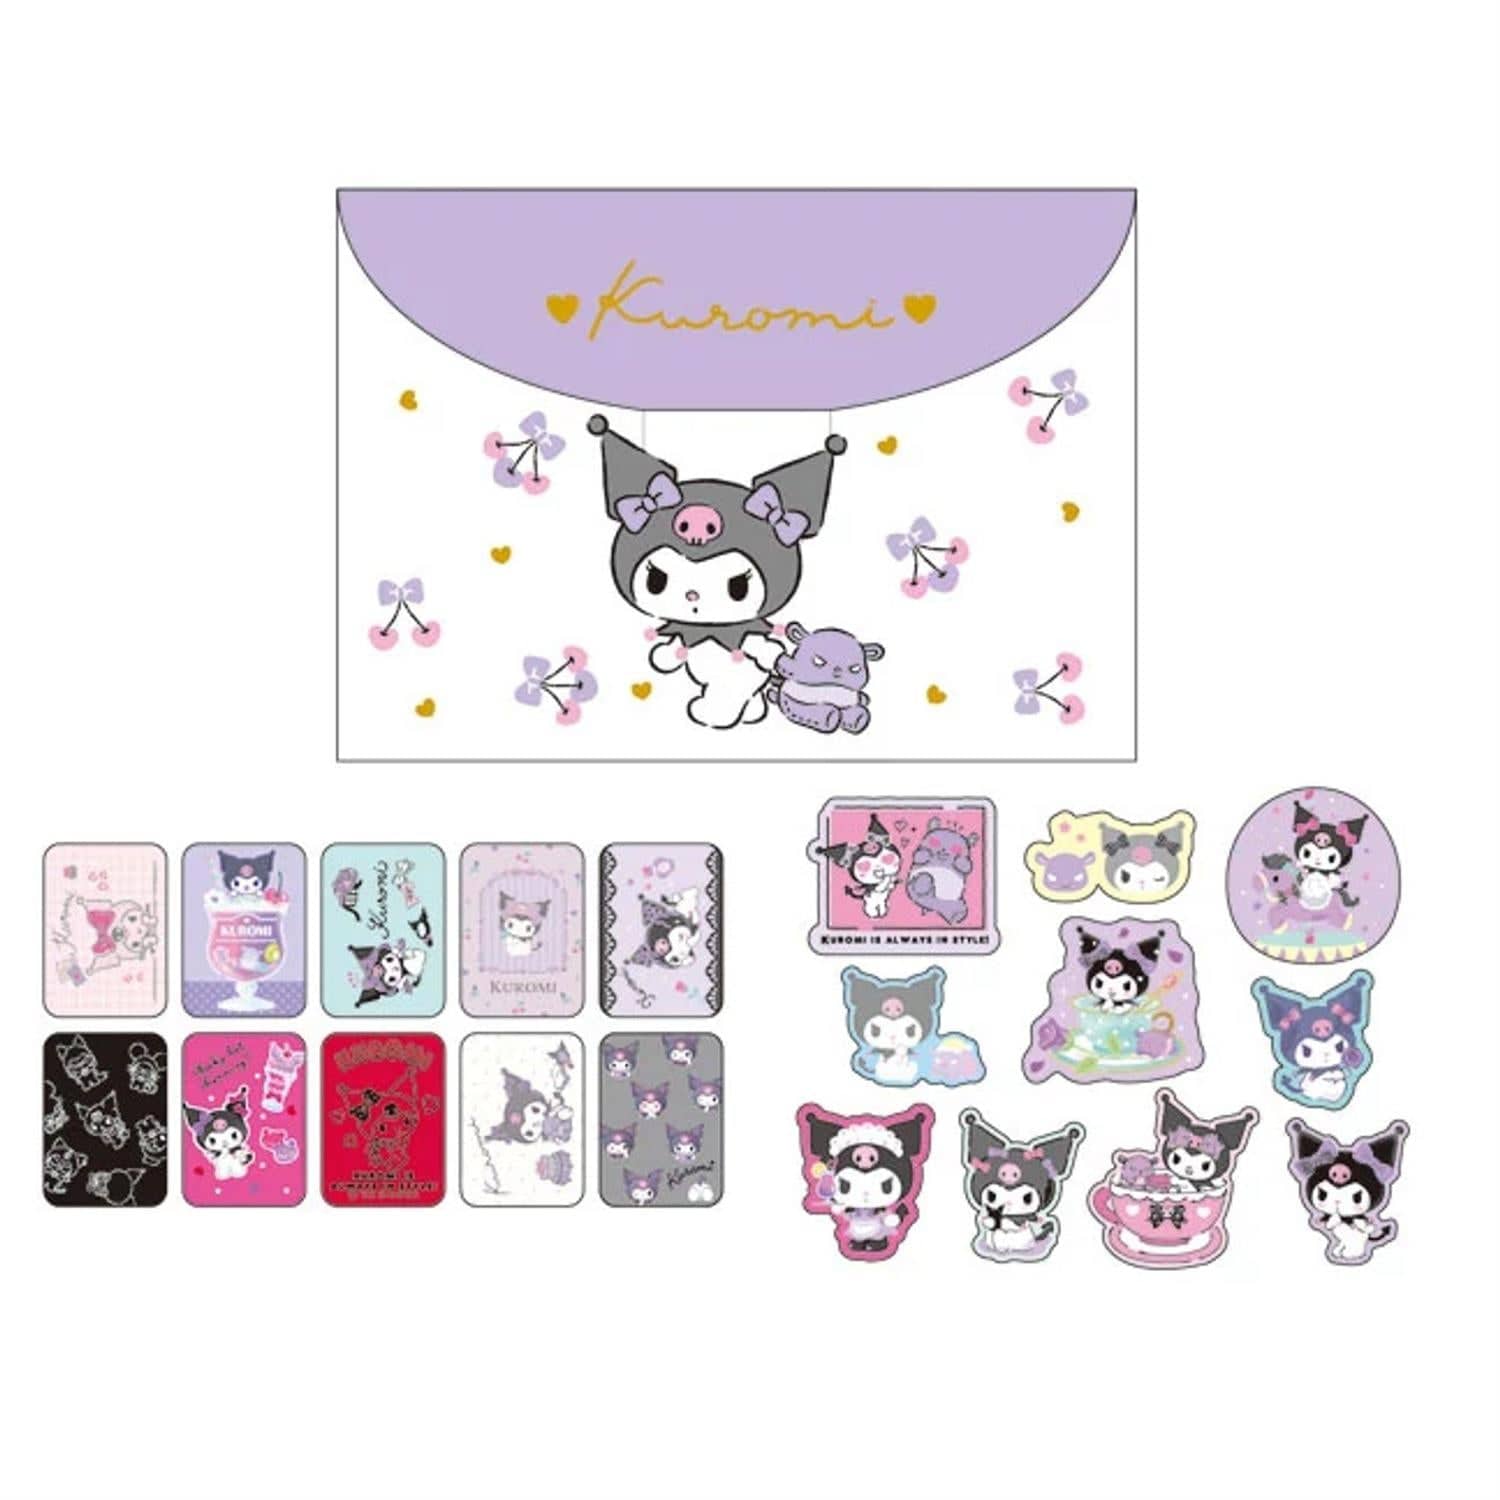 Kuromi Sticker Flakes with Pouch